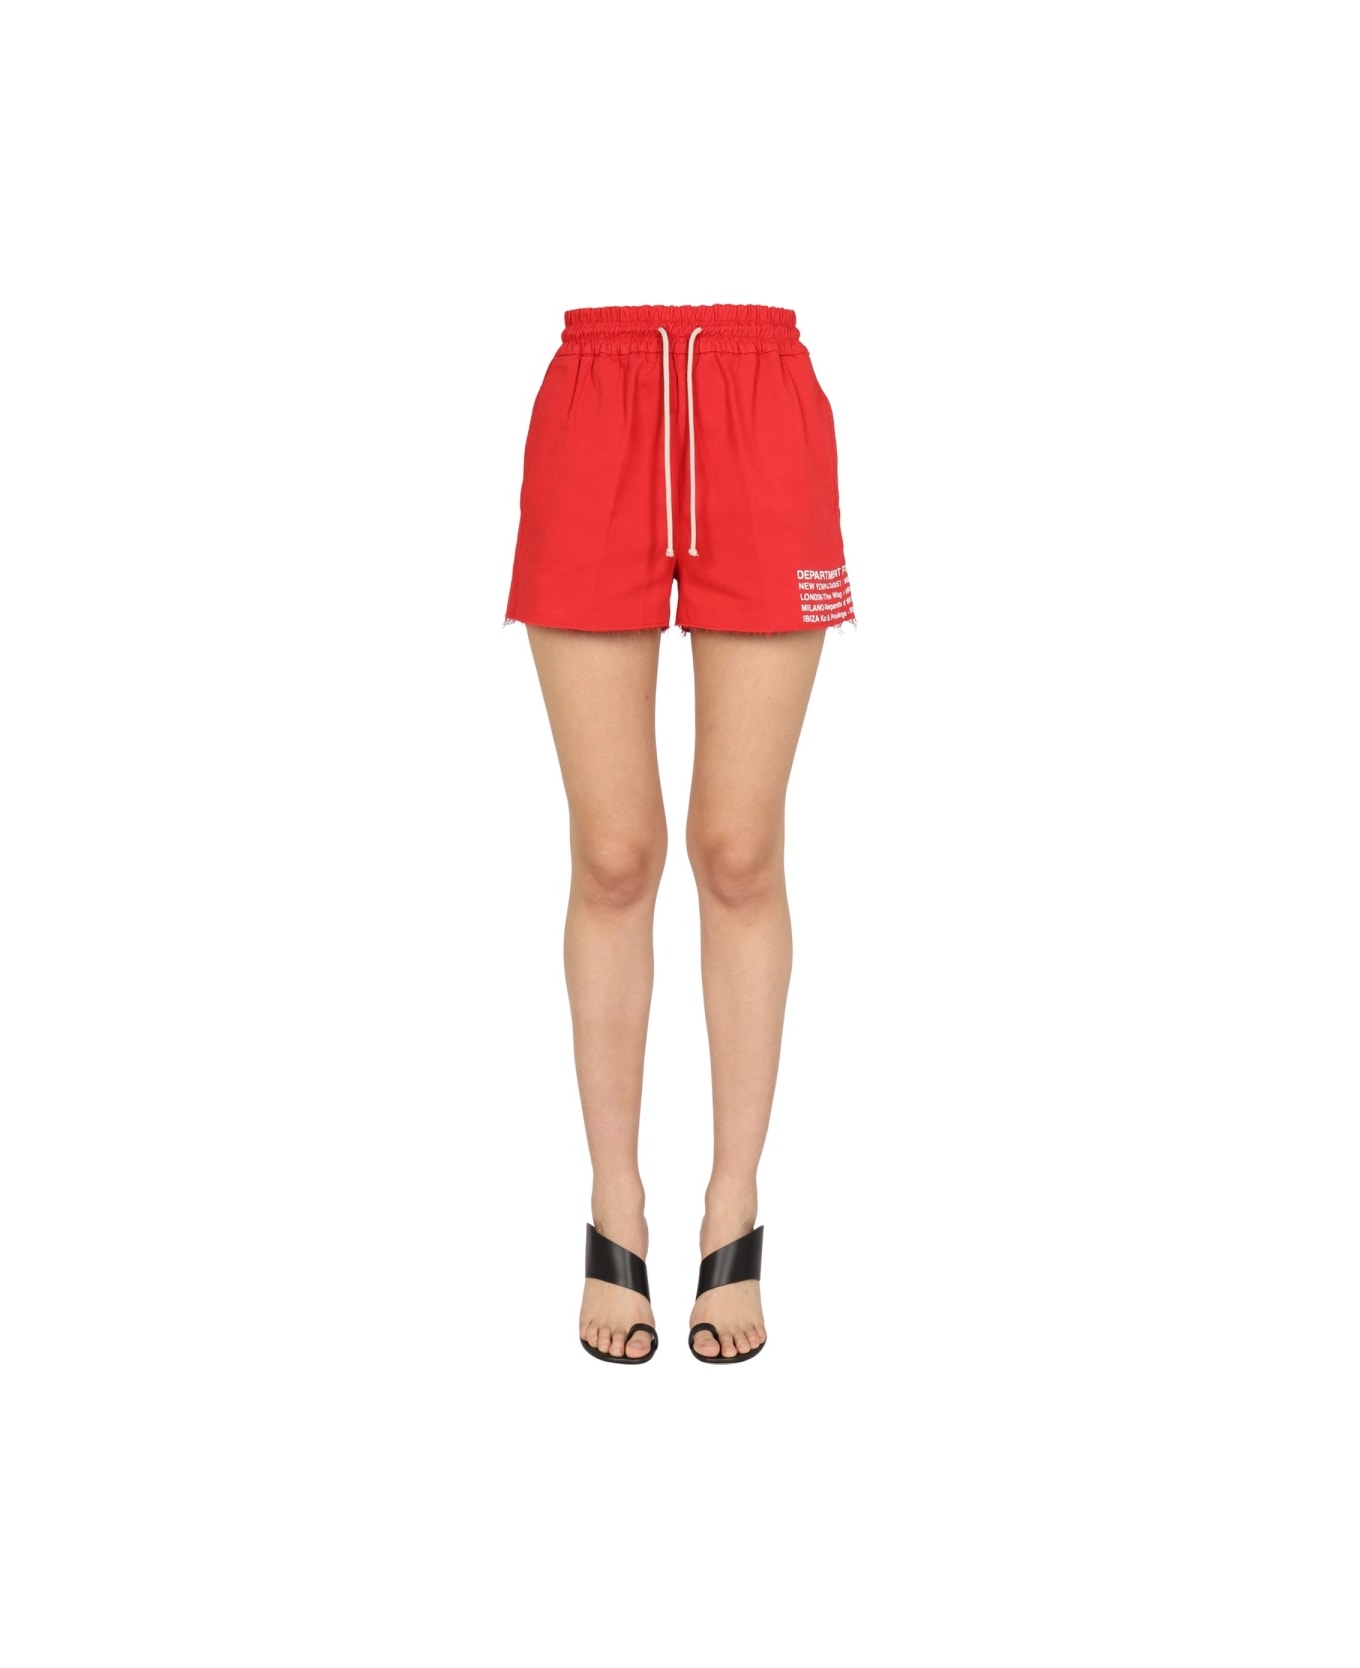 Department Five Logo Print Shorts - RED